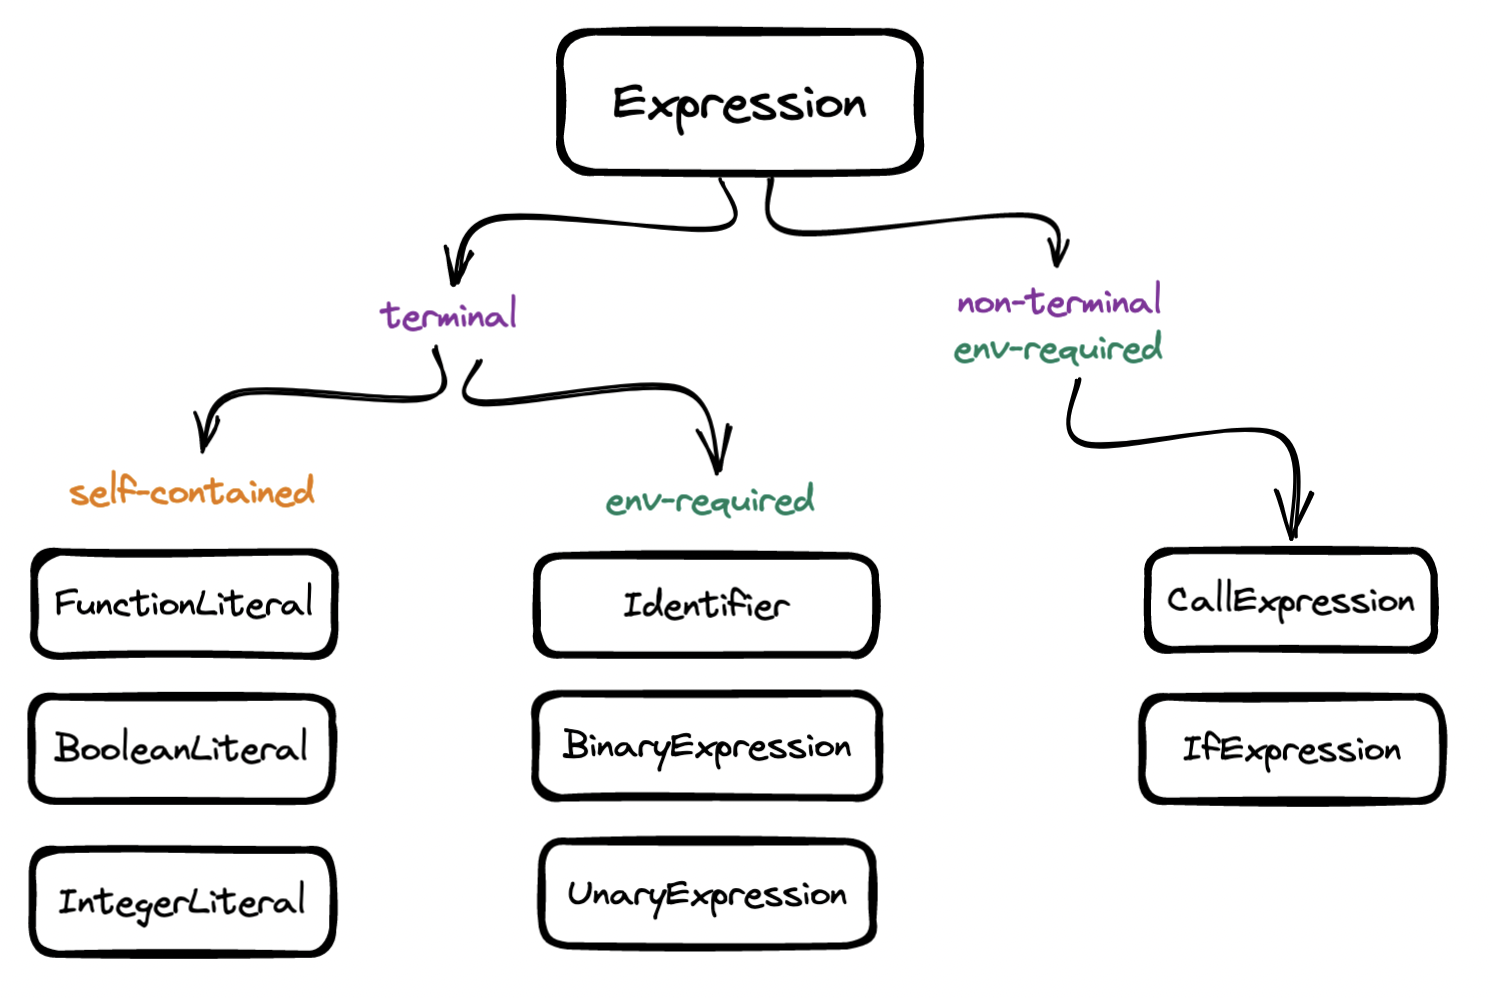 Expression types